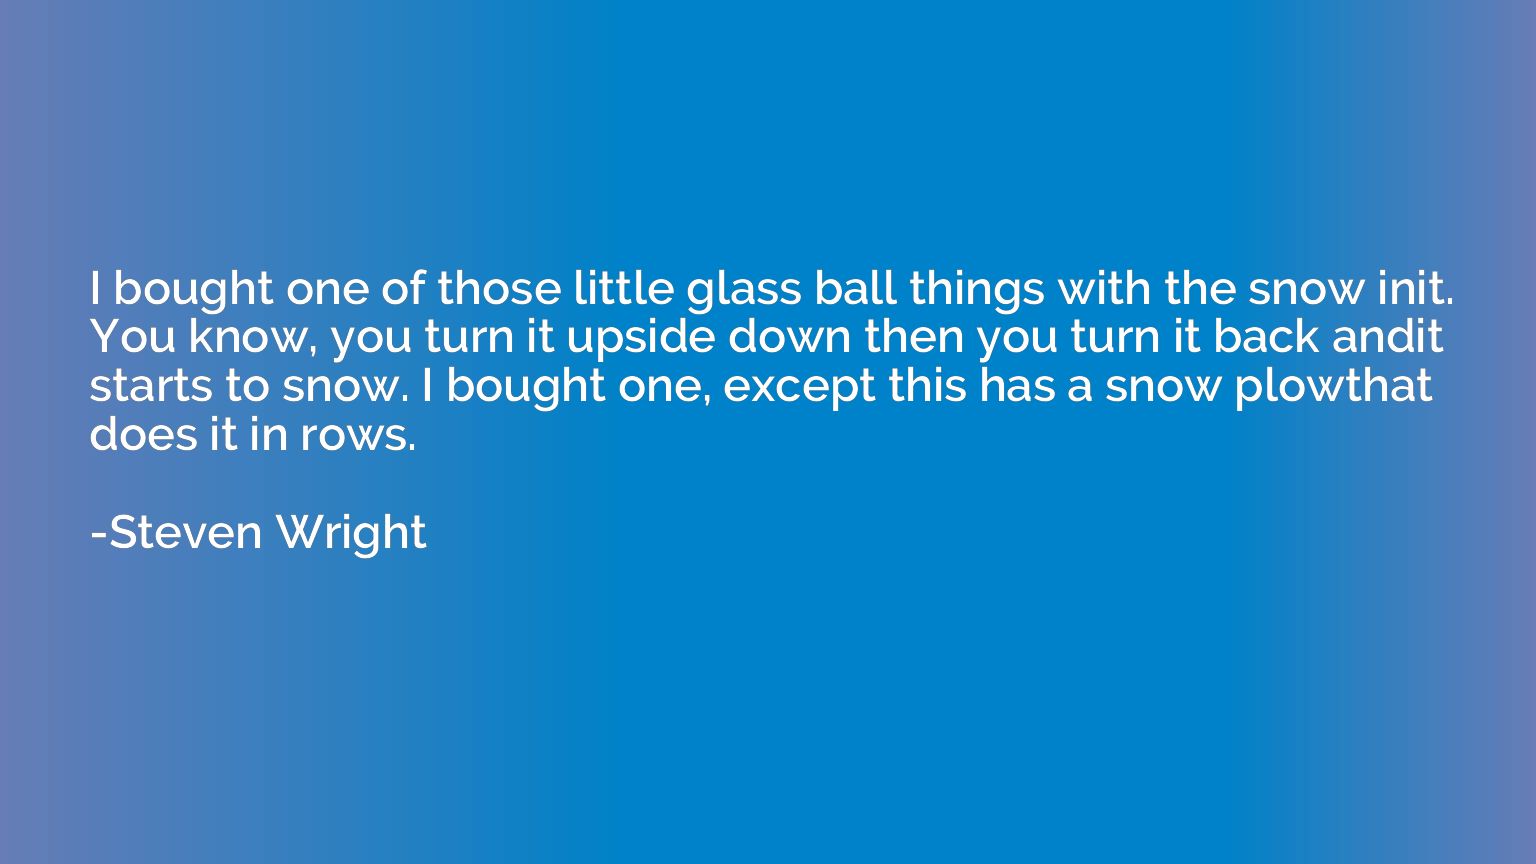 I bought one of those little glass ball things with the snow